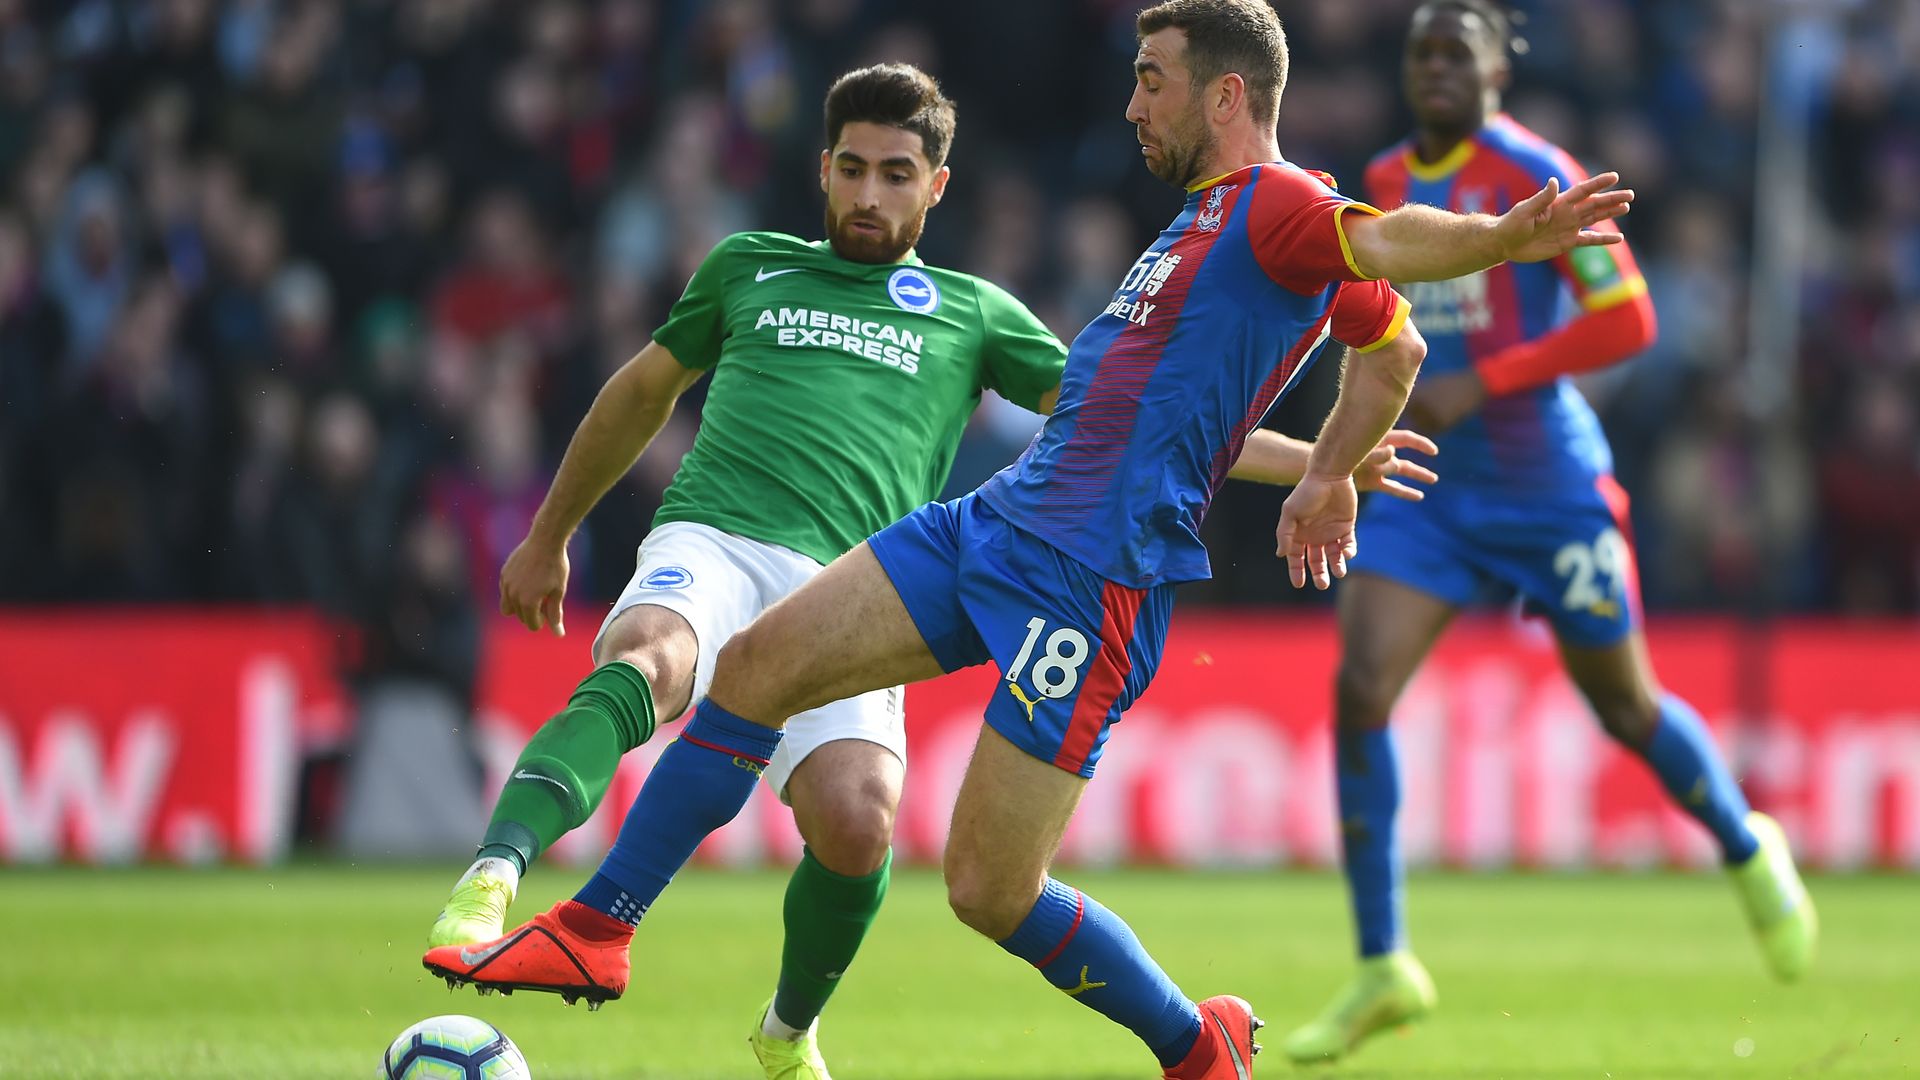 James McArthur of Crystal Palace is challenged by Alireza Jahanbakhsh of Brighton & Hove Albion during the Premier League match between Crystal Palace and Brighton & Hove Albion 